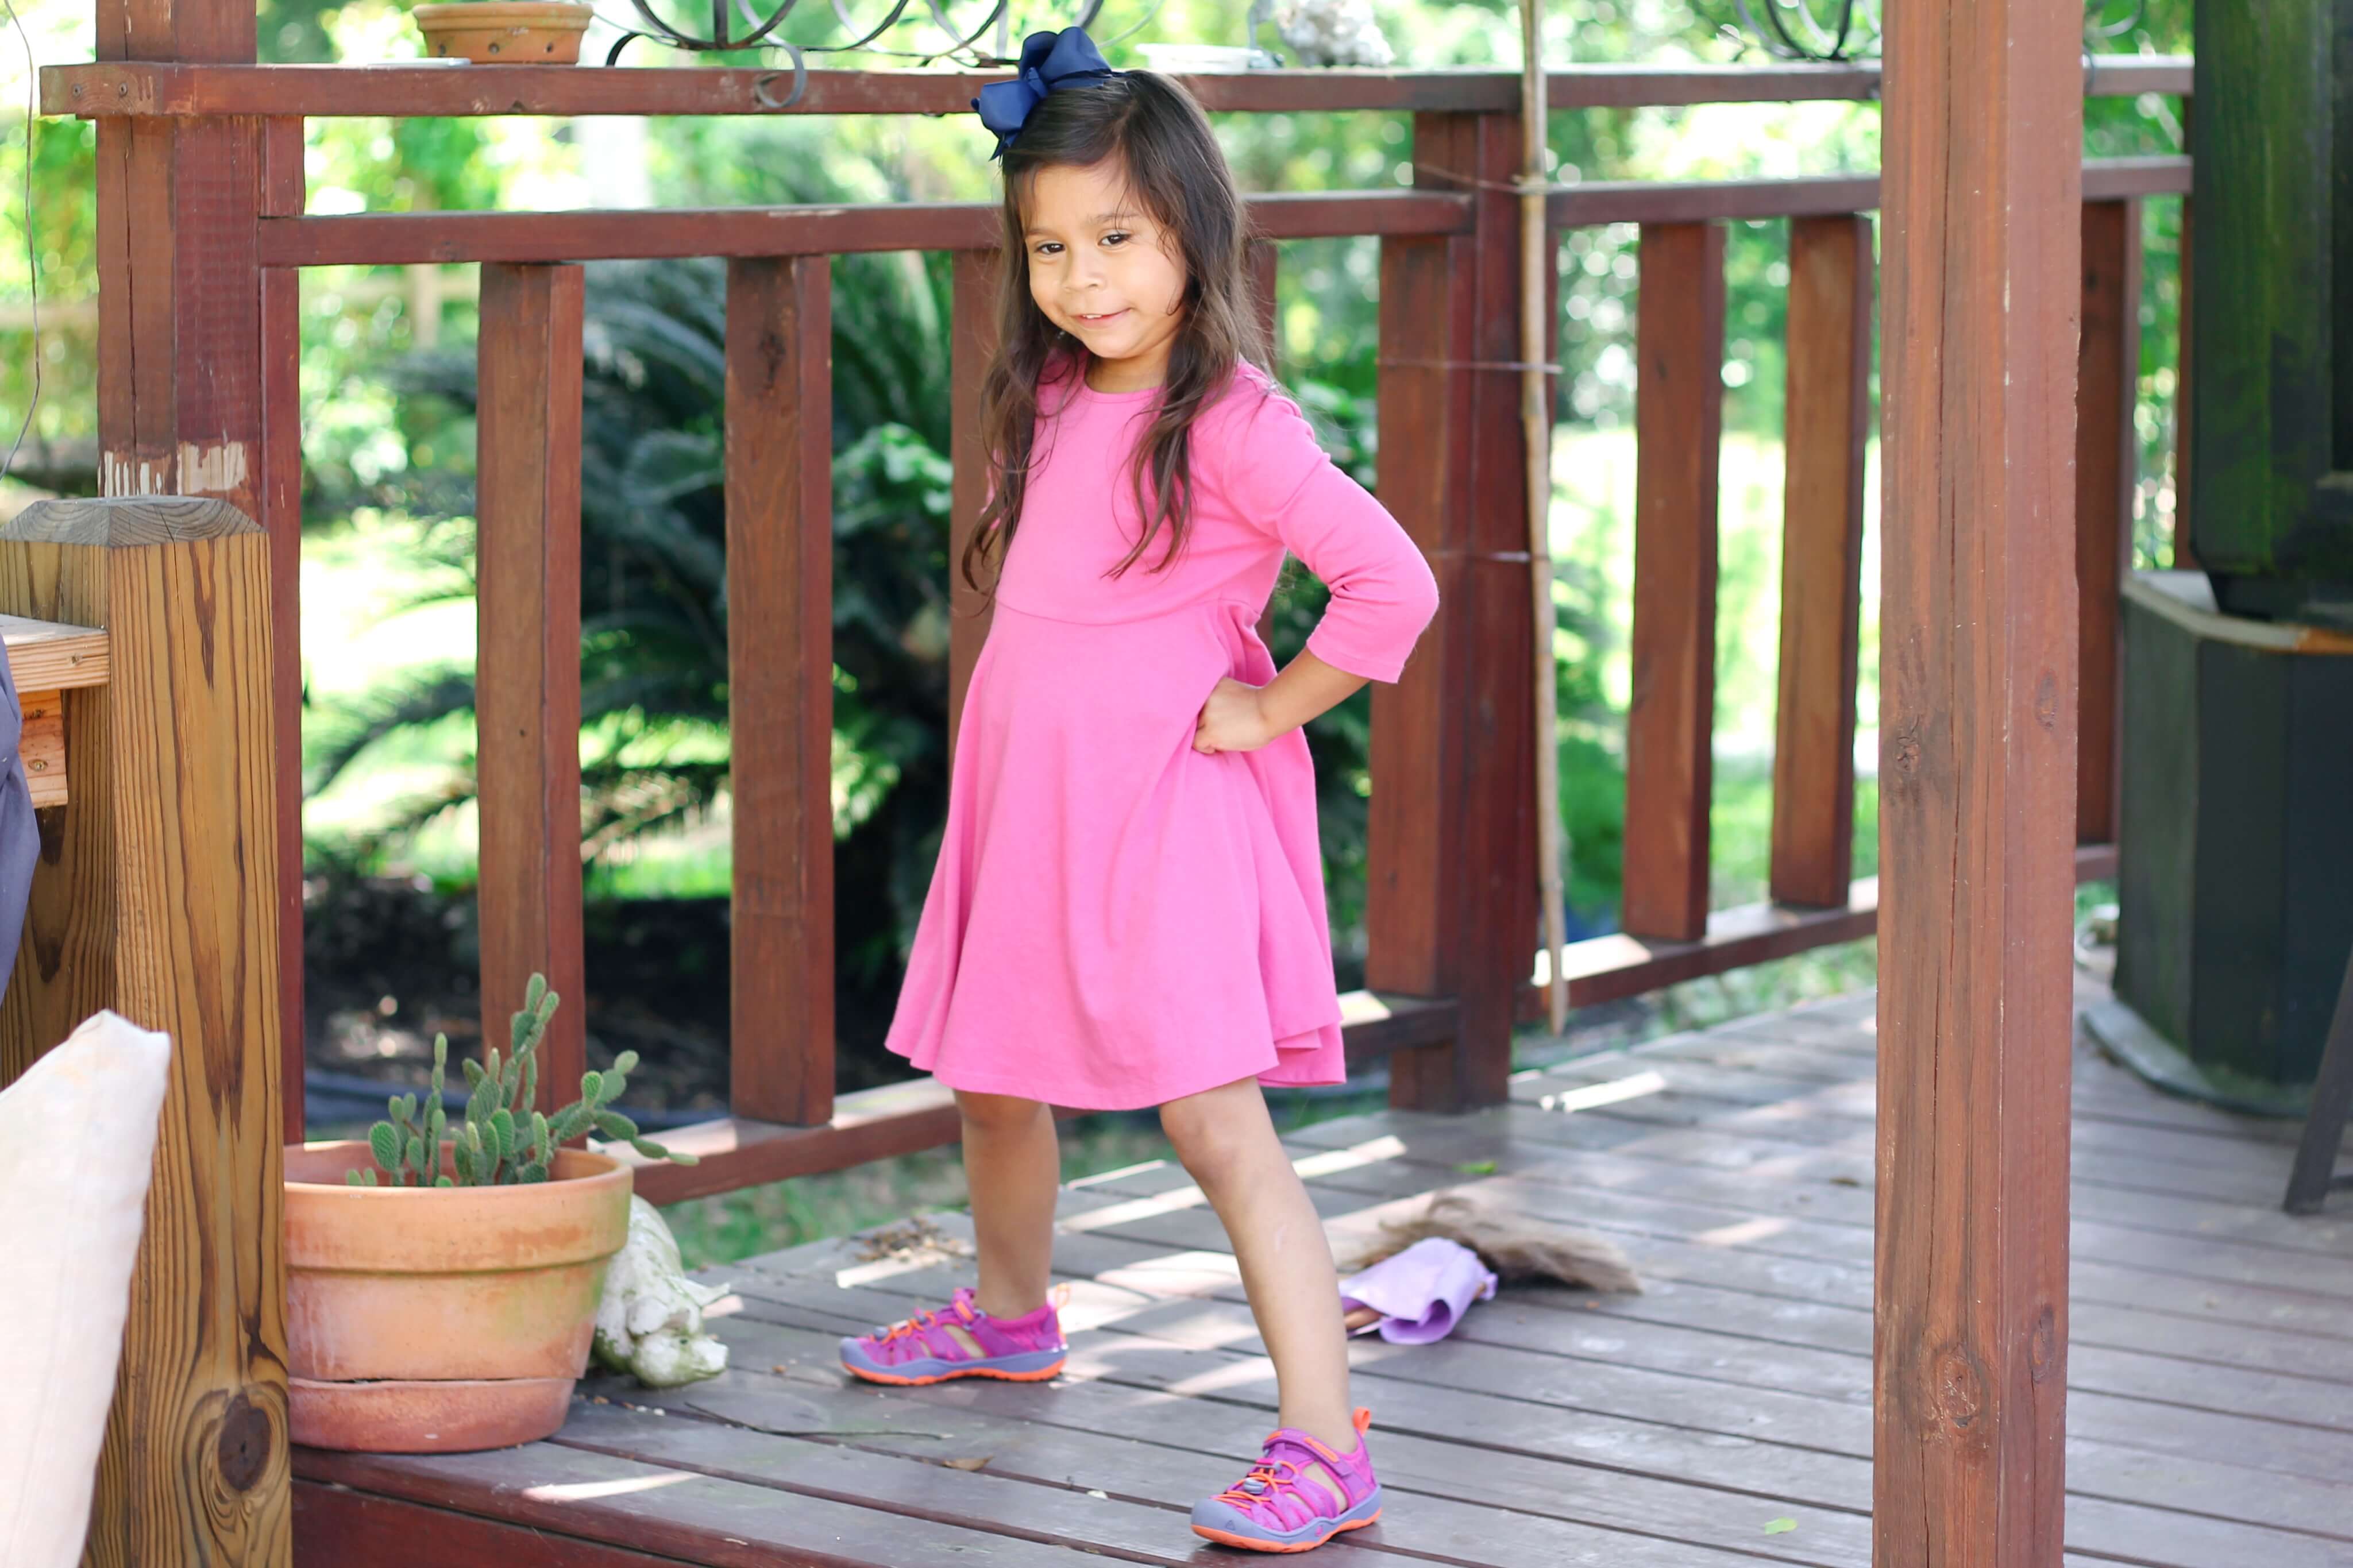 Keen Moxie sandals. The perfect summer shoe for kids!